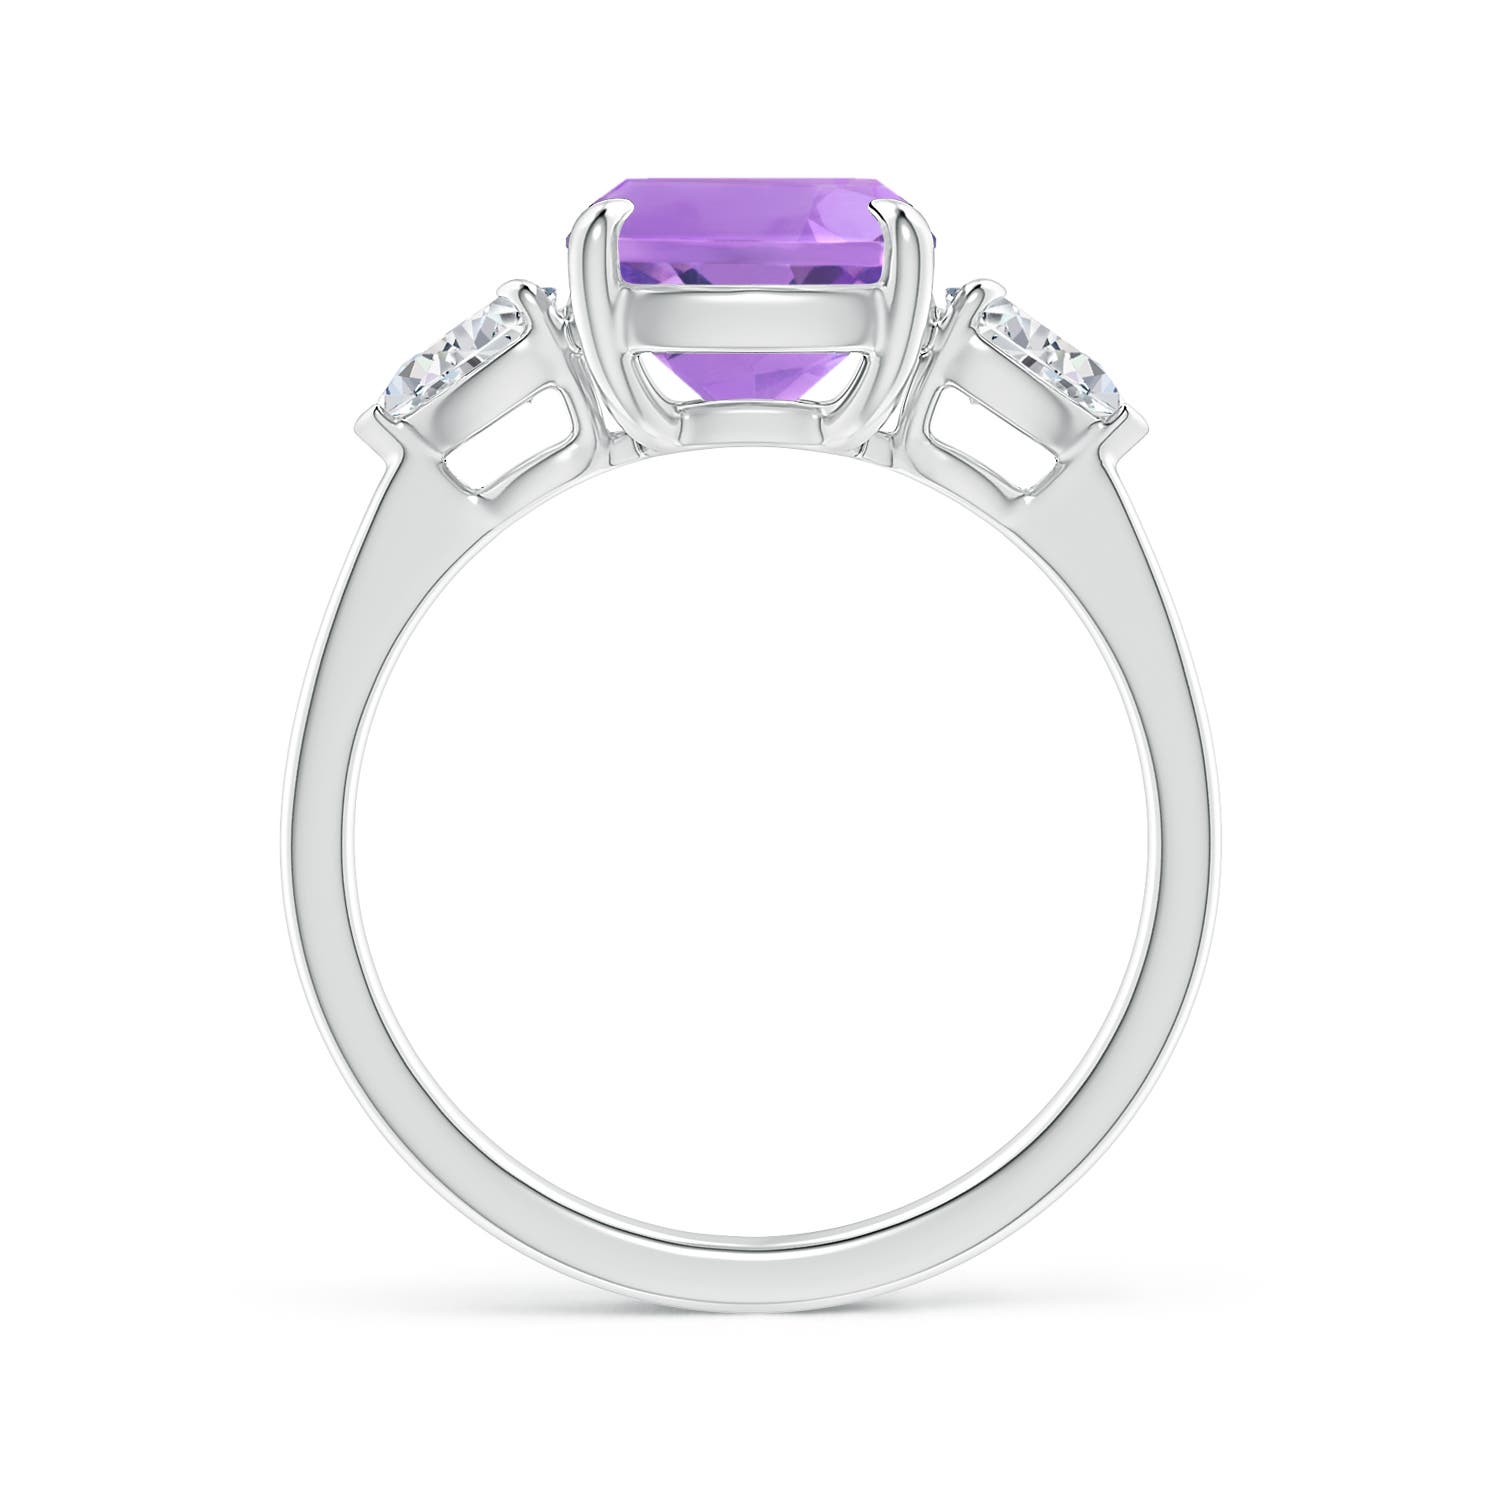 A - Amethyst / 3.1 CT / 14 KT White Gold